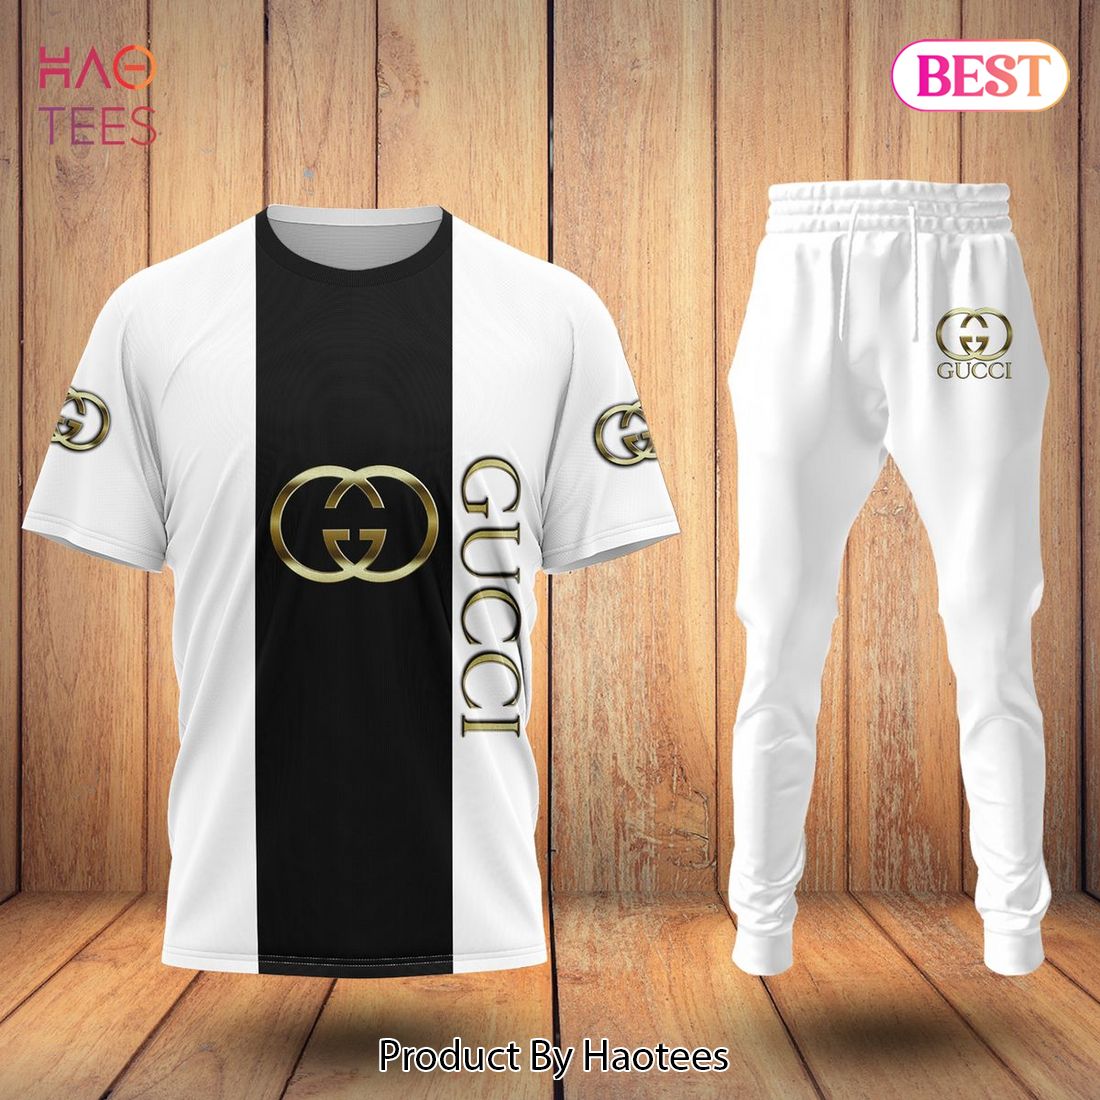 TRENDDING Gucci Black Mix White Luxury Brand T-Shirt And Pants Limited Edition